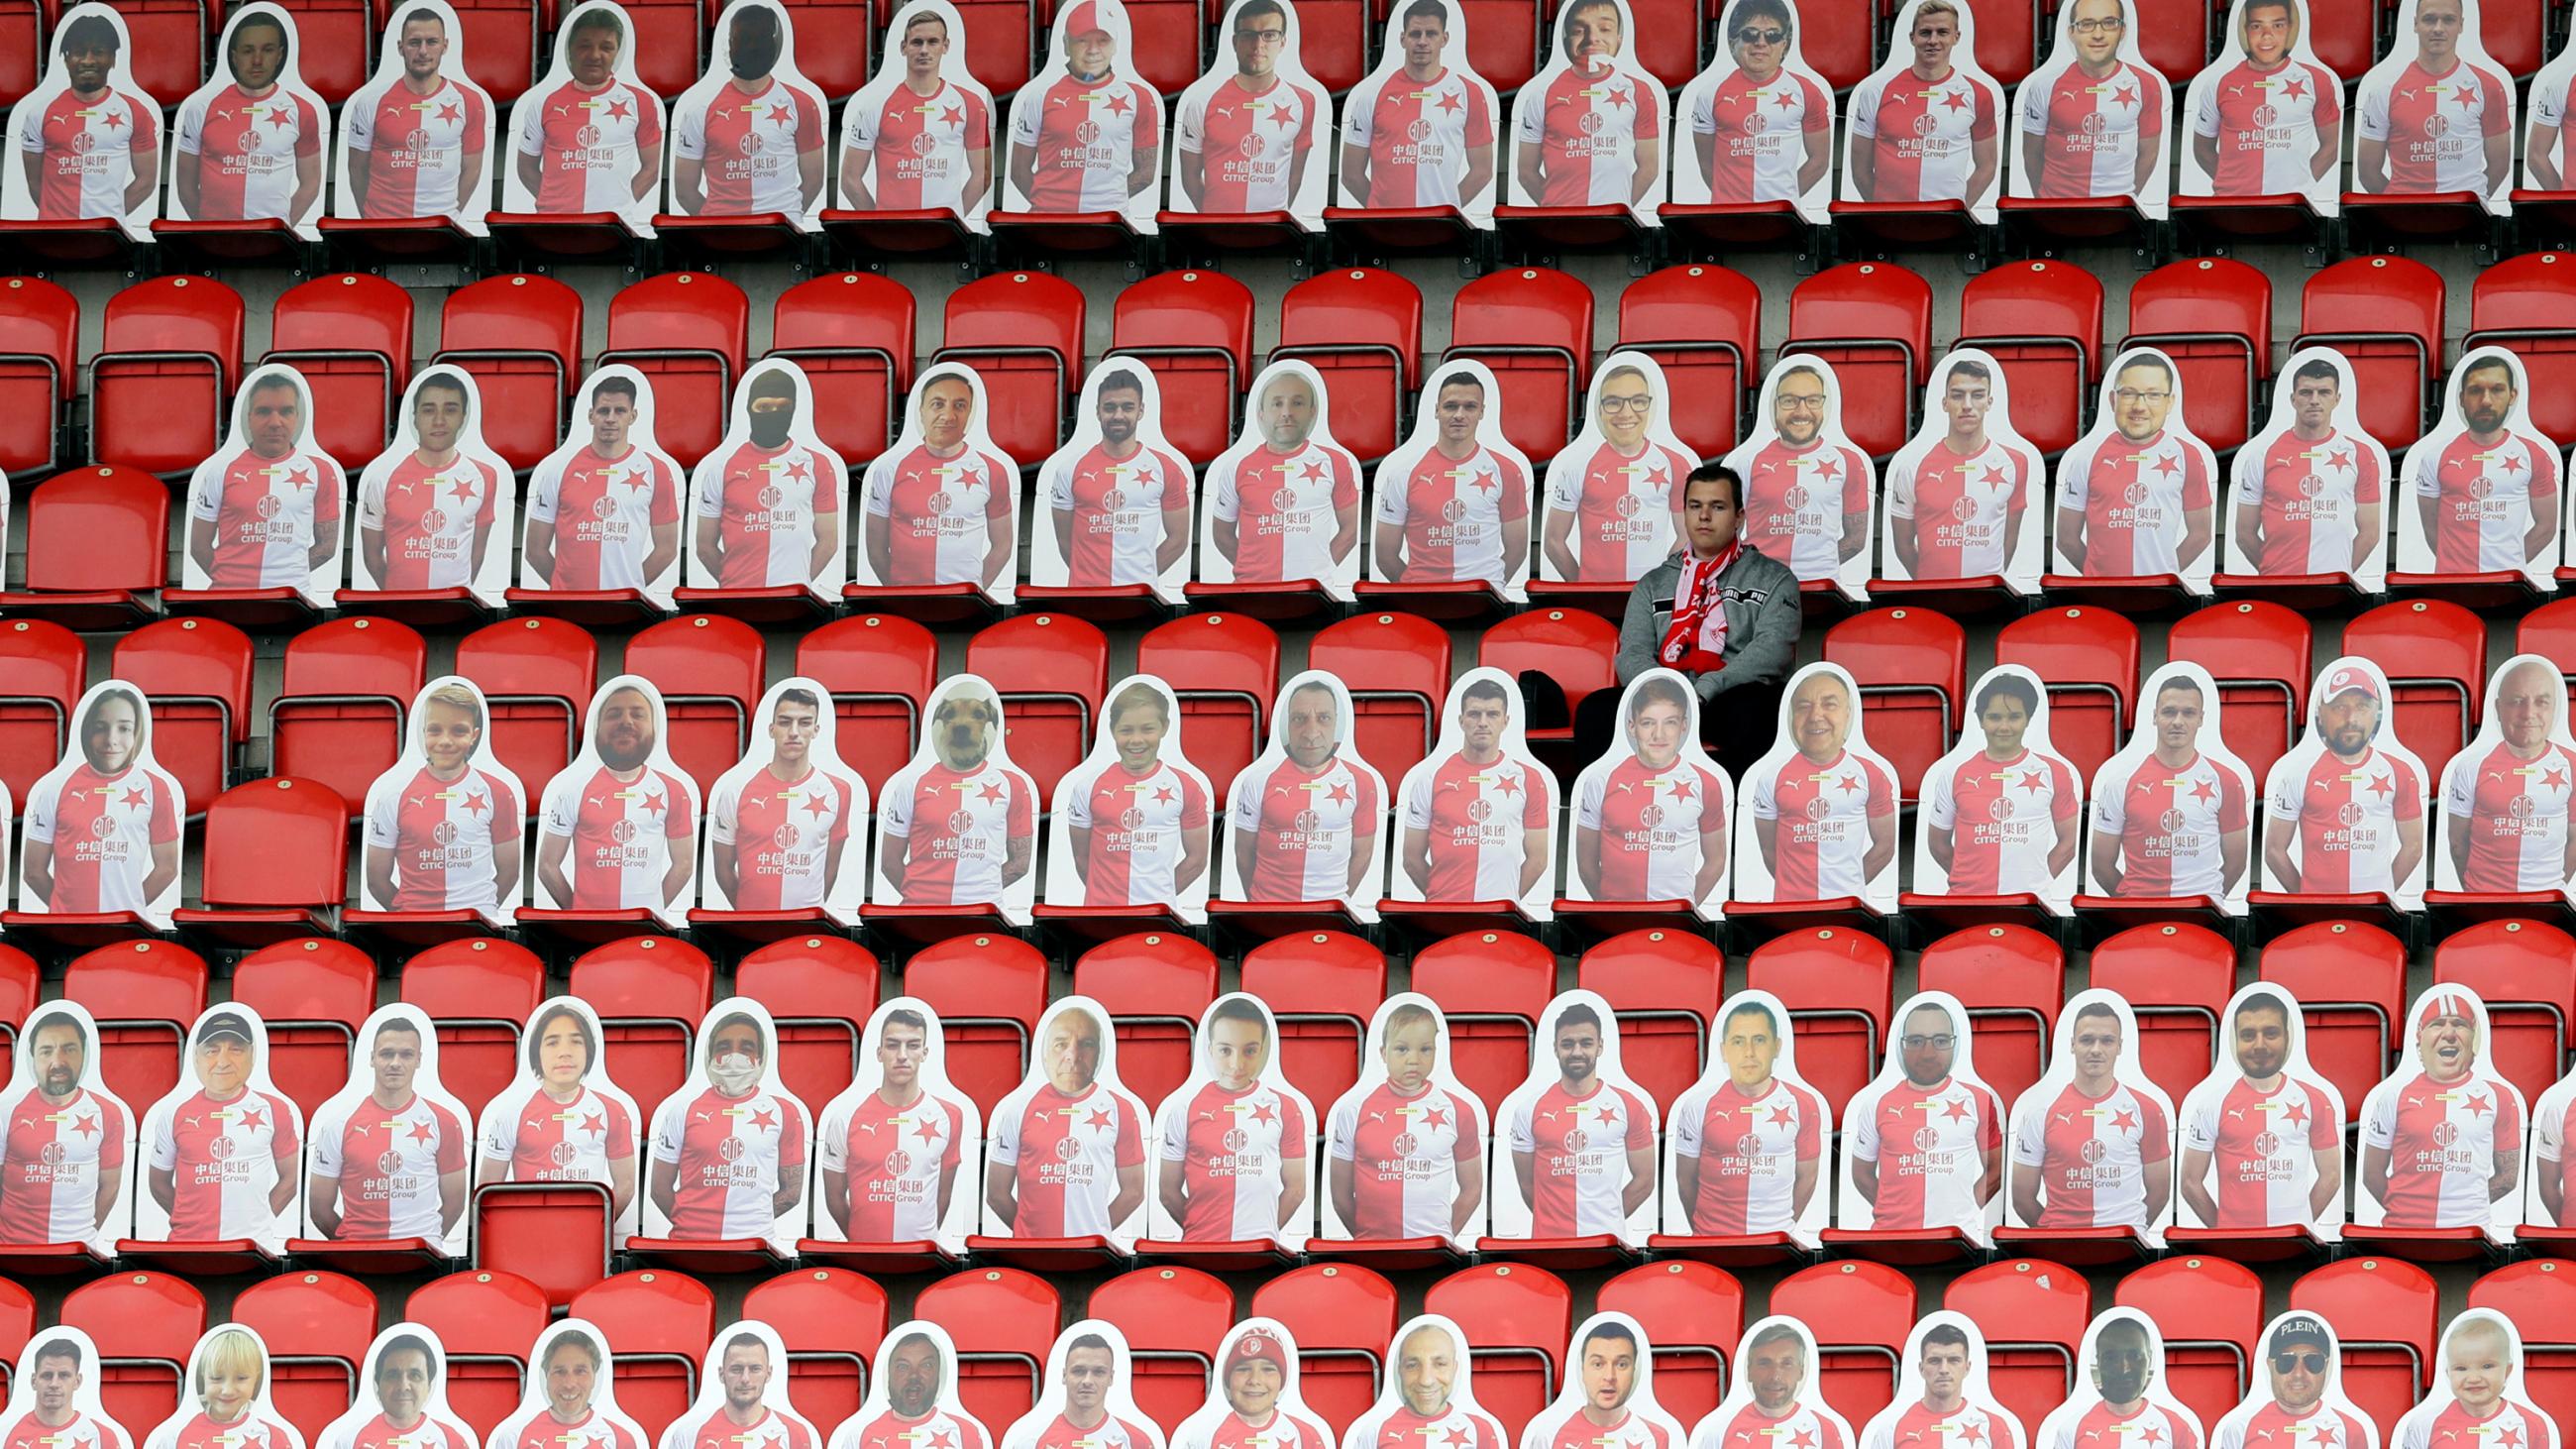 The photo shows the bleacher seats of a stadium filled with cardboard cutouts. 